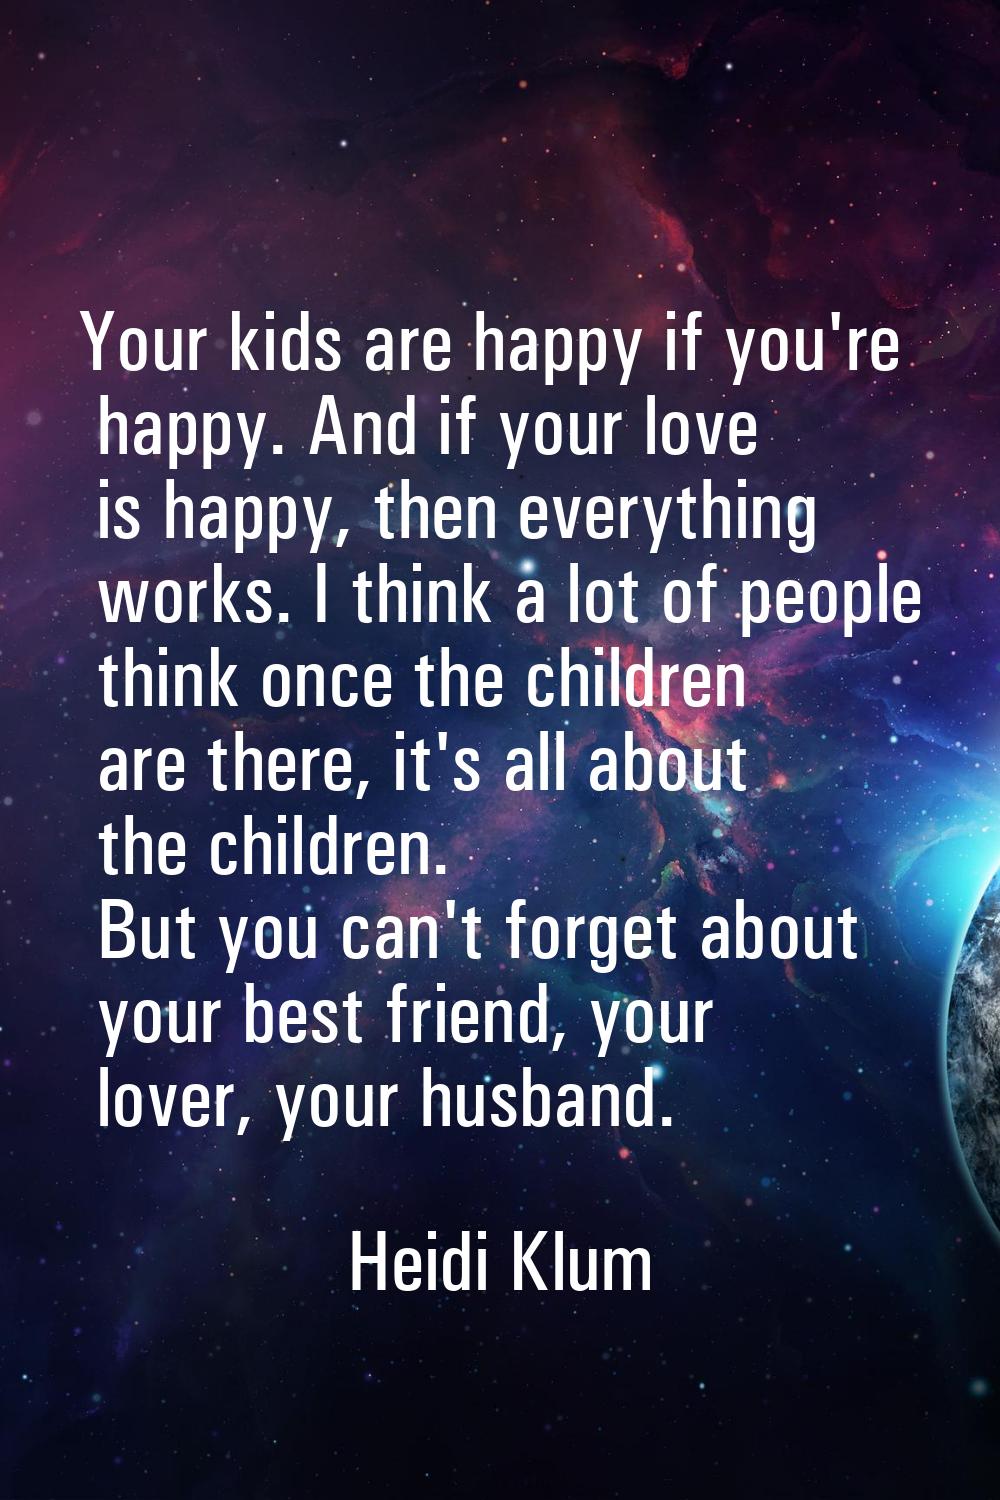 Your kids are happy if you're happy. And if your love is happy, then everything works. I think a lo